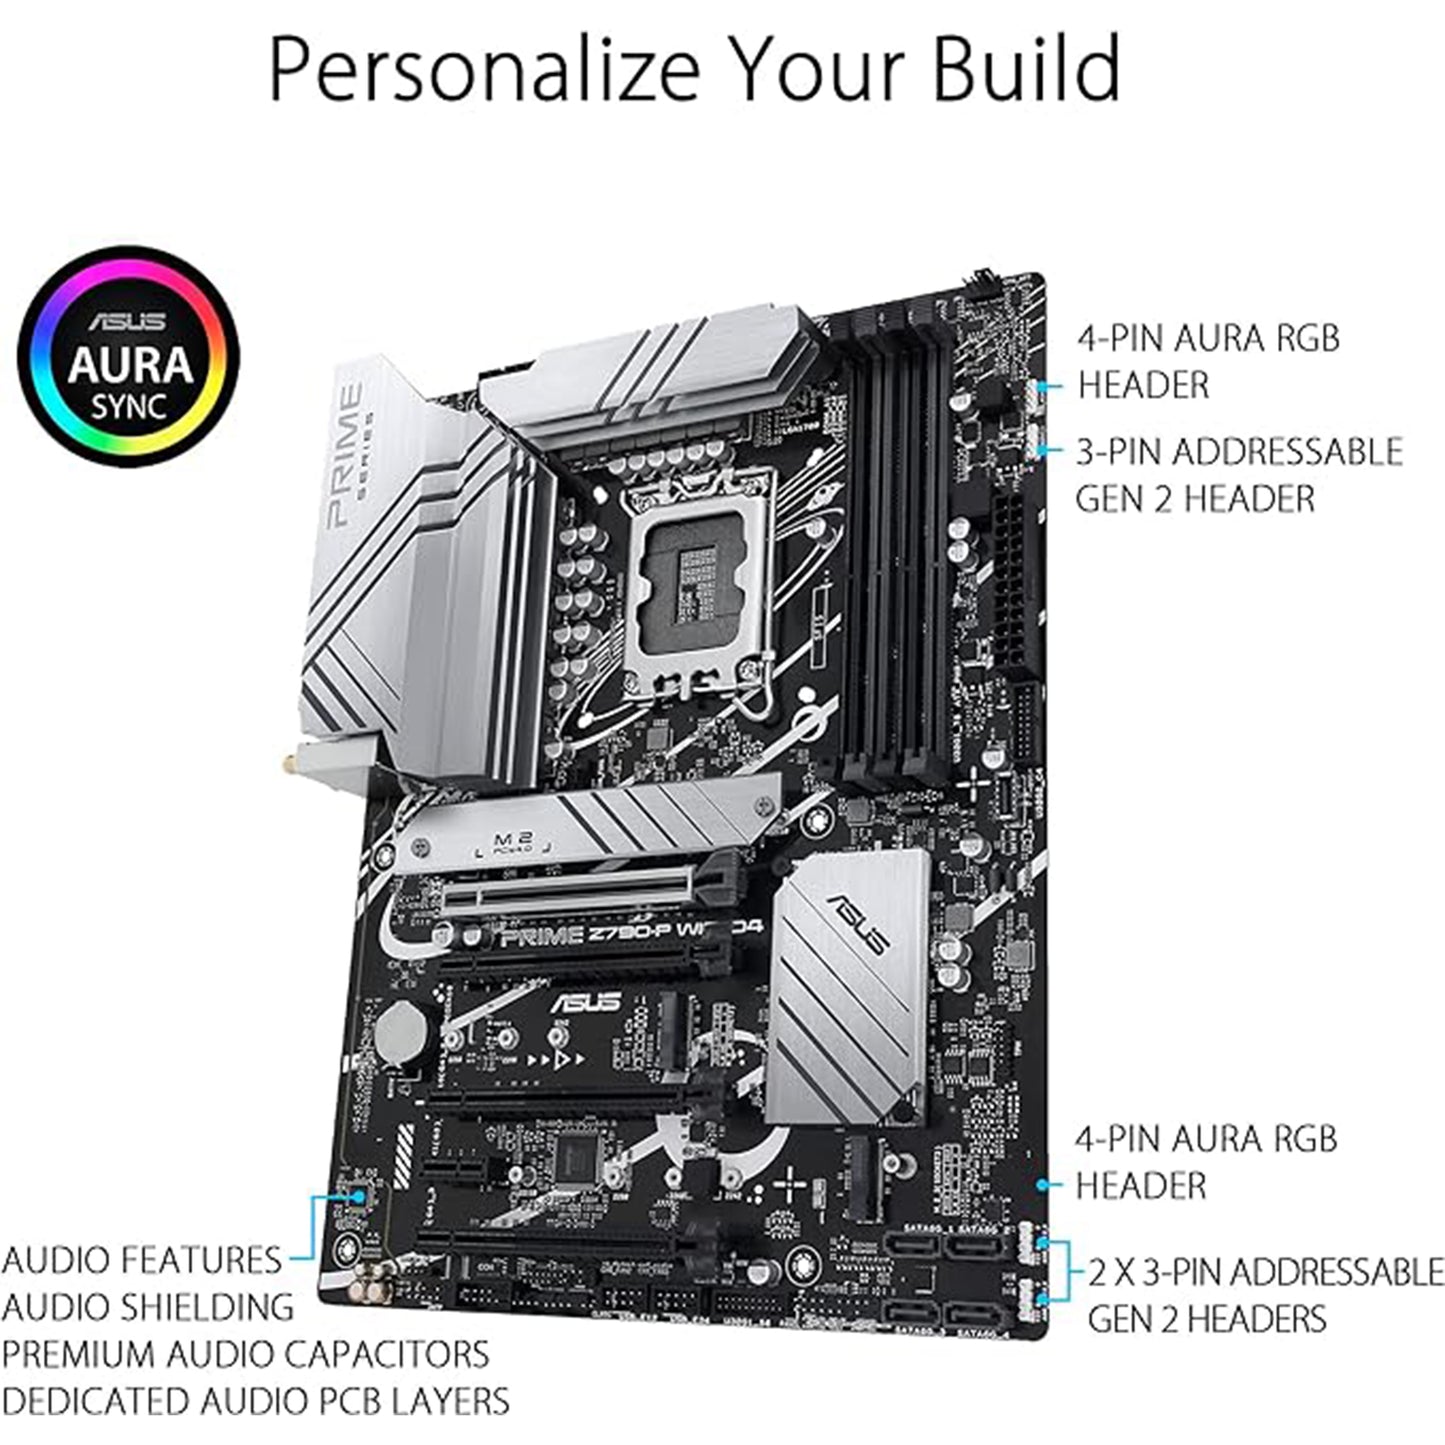 INLAND Micro Center Core i7-13700K Desktop Processor 16 (8P+8E) Cores up to 5.4 GHz Unlocked with Prime Z790-P WiFi DDR4 LGA 1700 ATX Gaming Motherboard